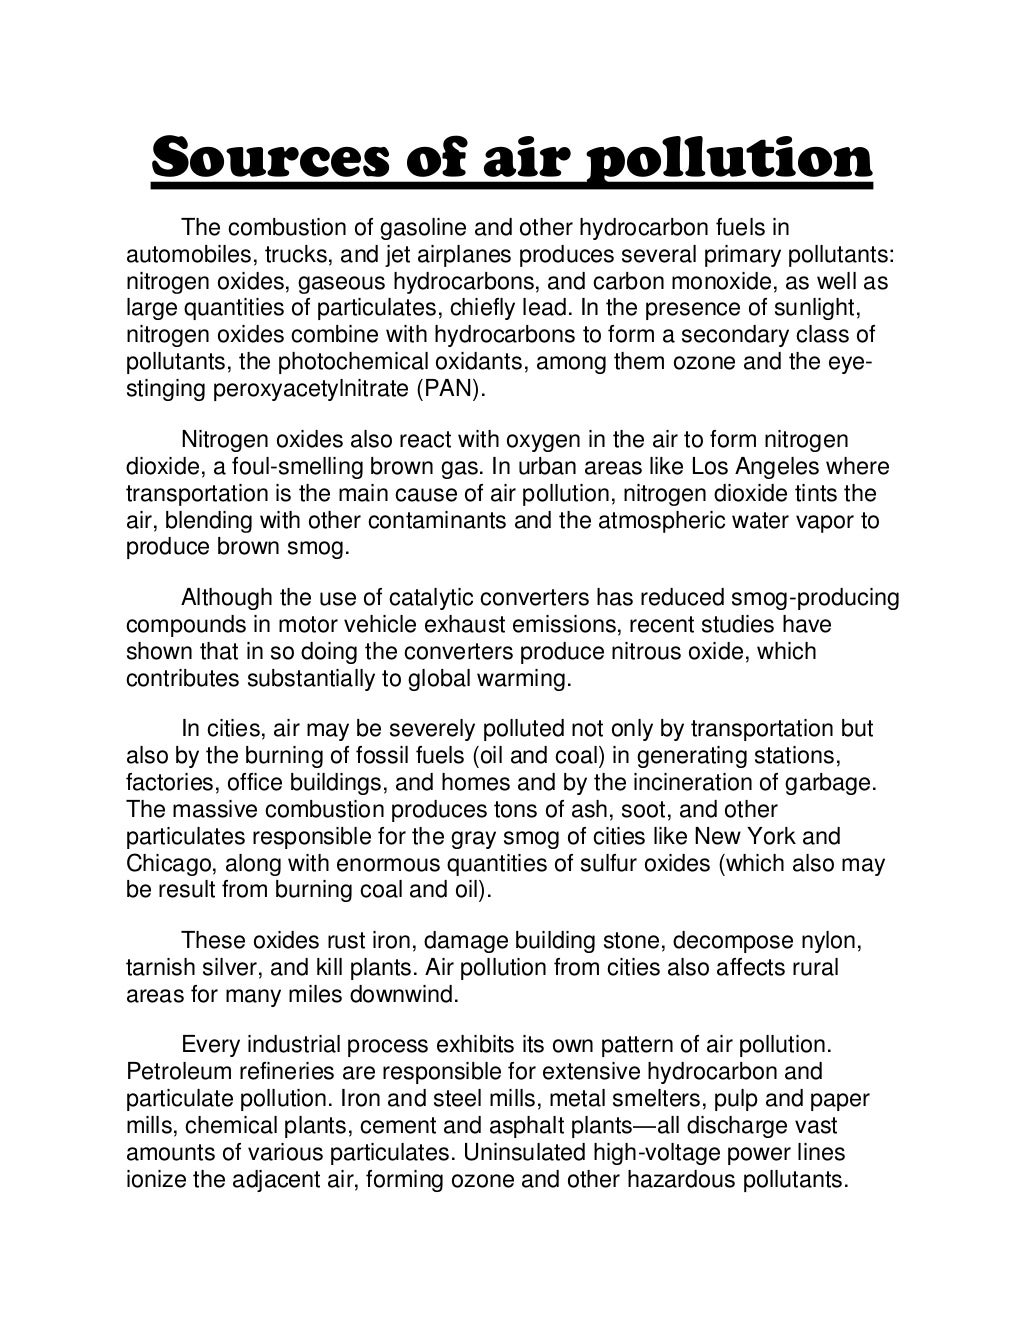 title for air pollution research paper